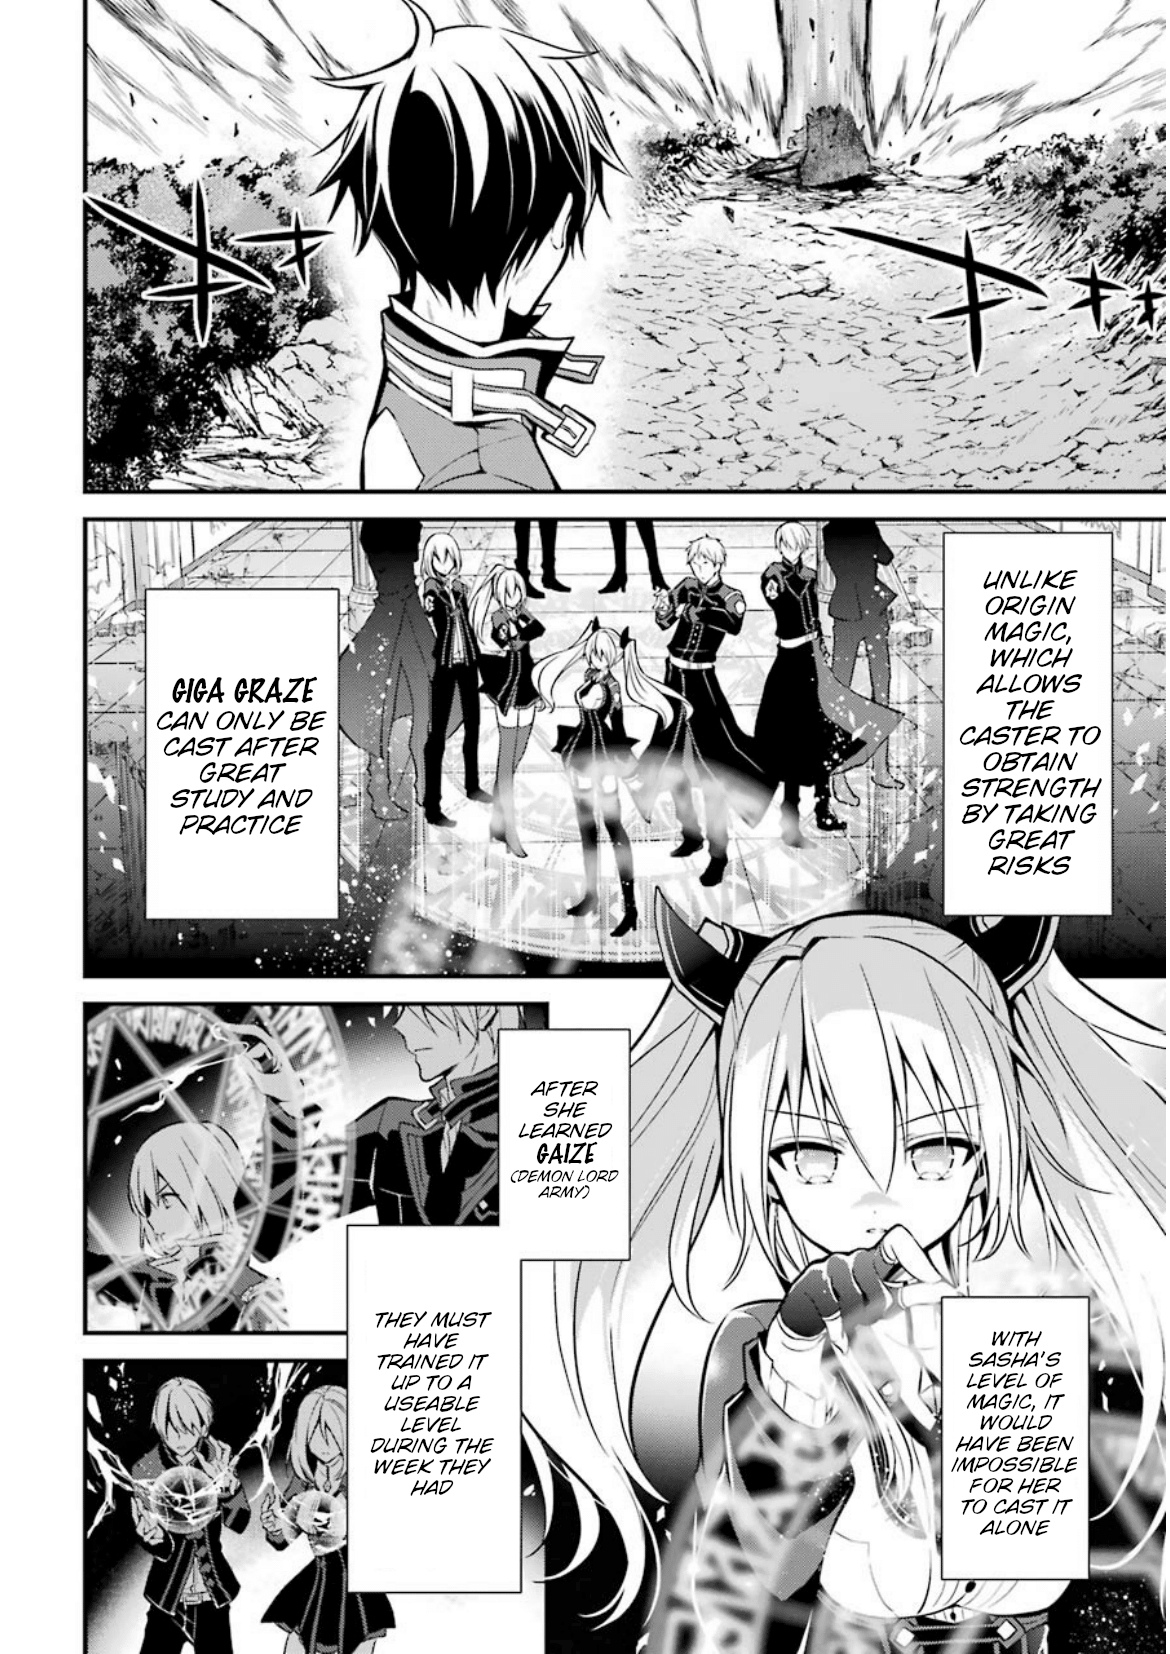 Maou Gakuin no Futekigousha Vol.2 Chapter 5: Magical Power in a Different League